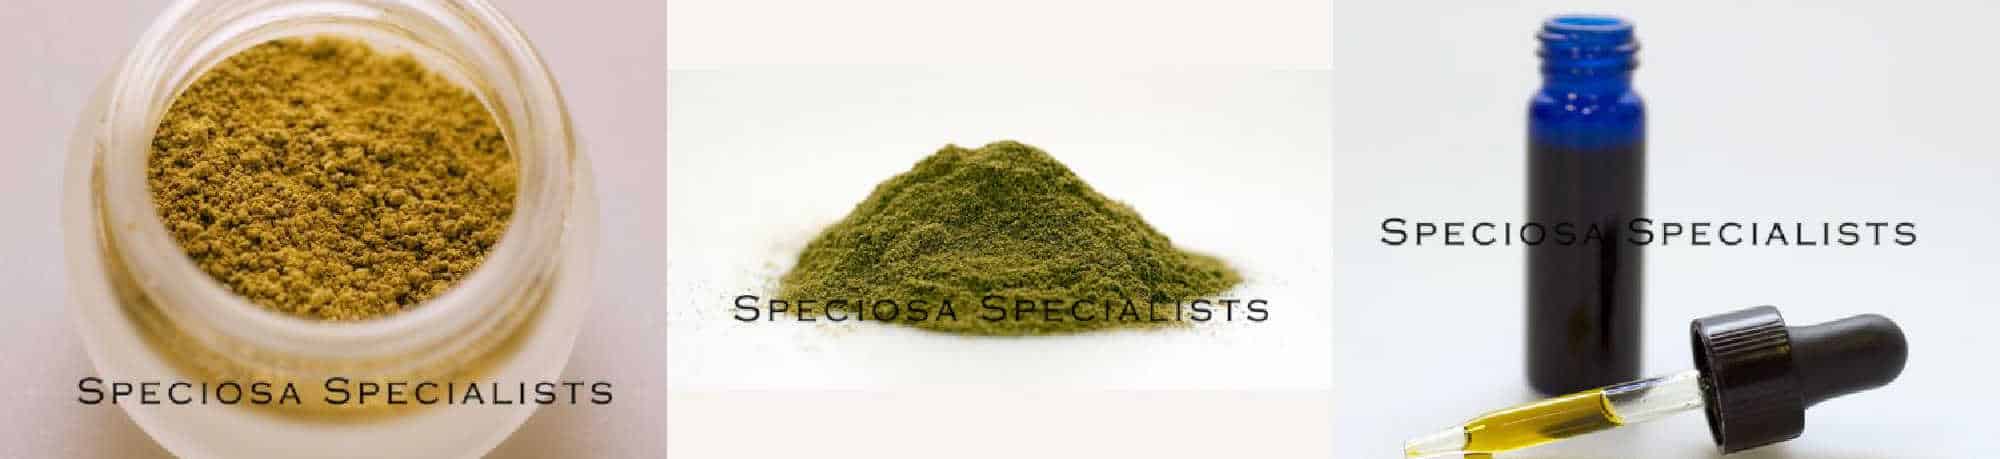 image of speciosa specialists products